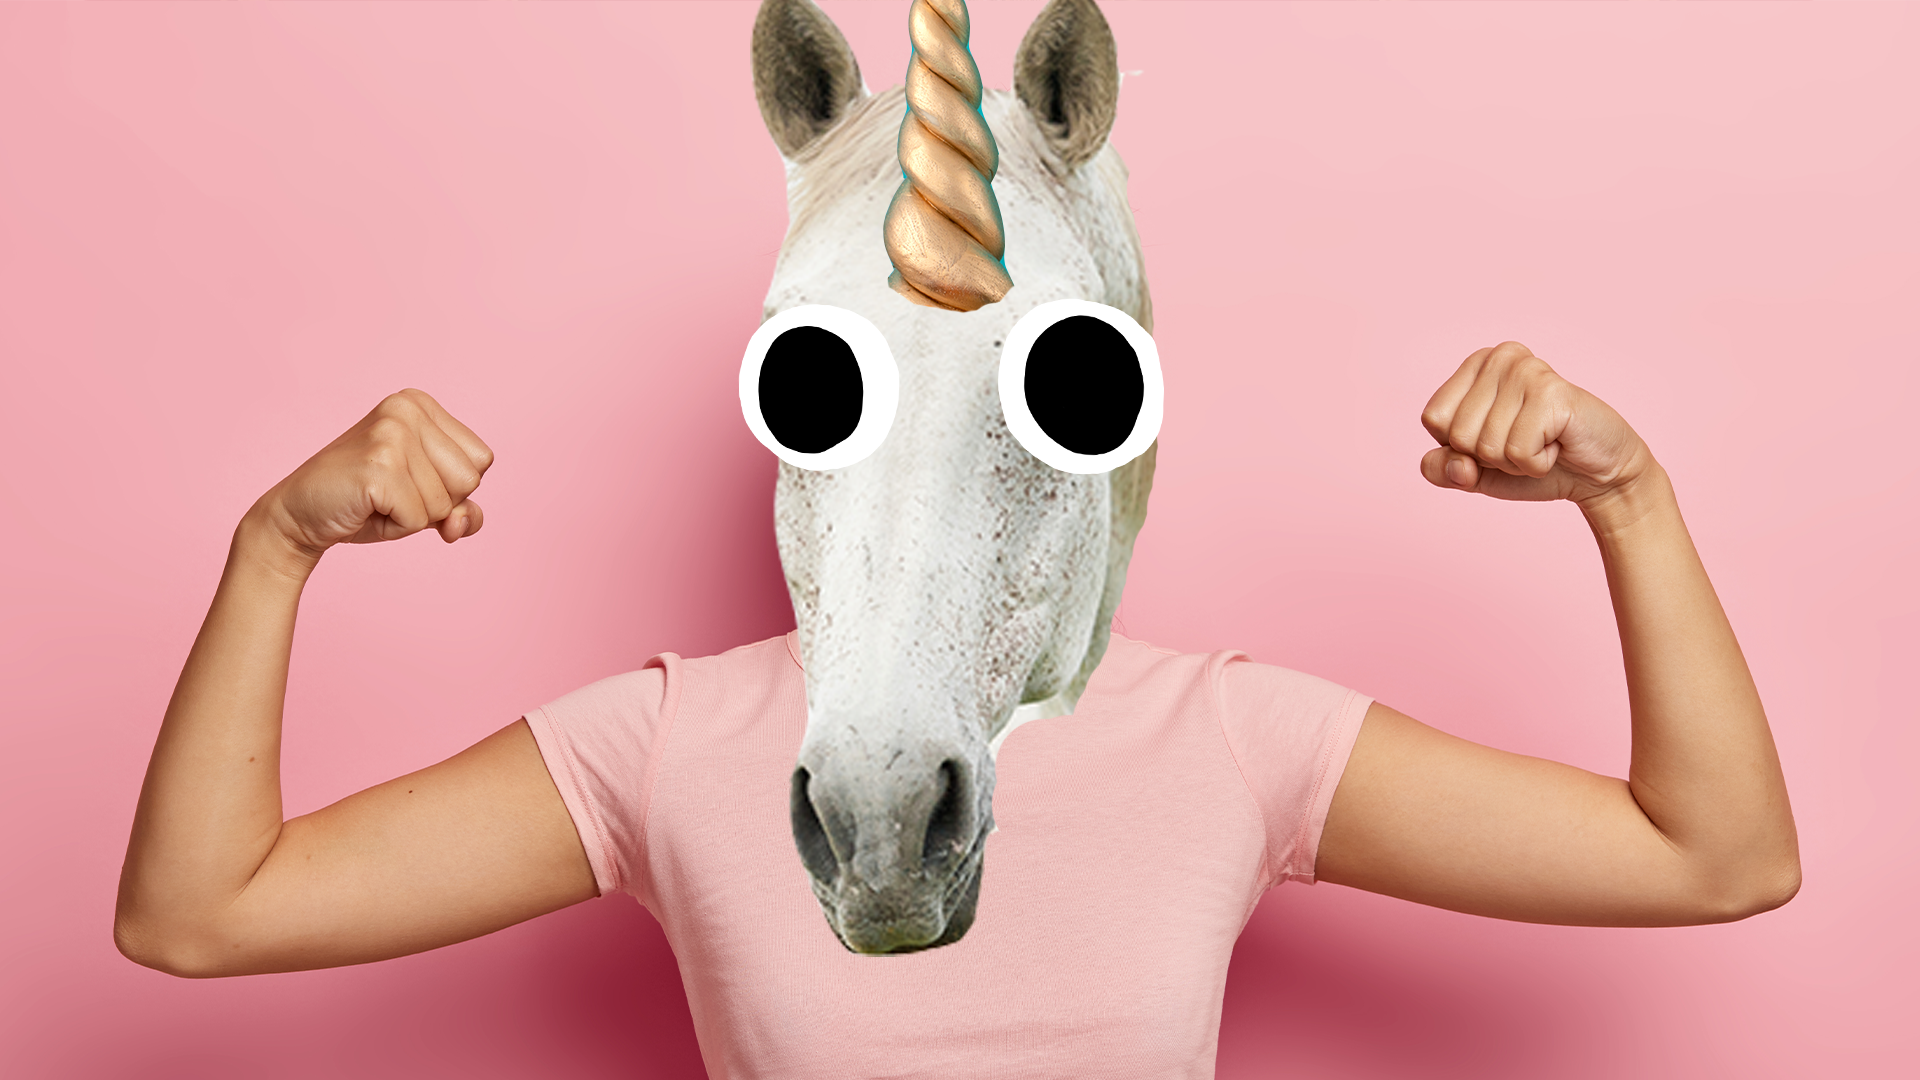 Unicorn woman looking strong on pink background